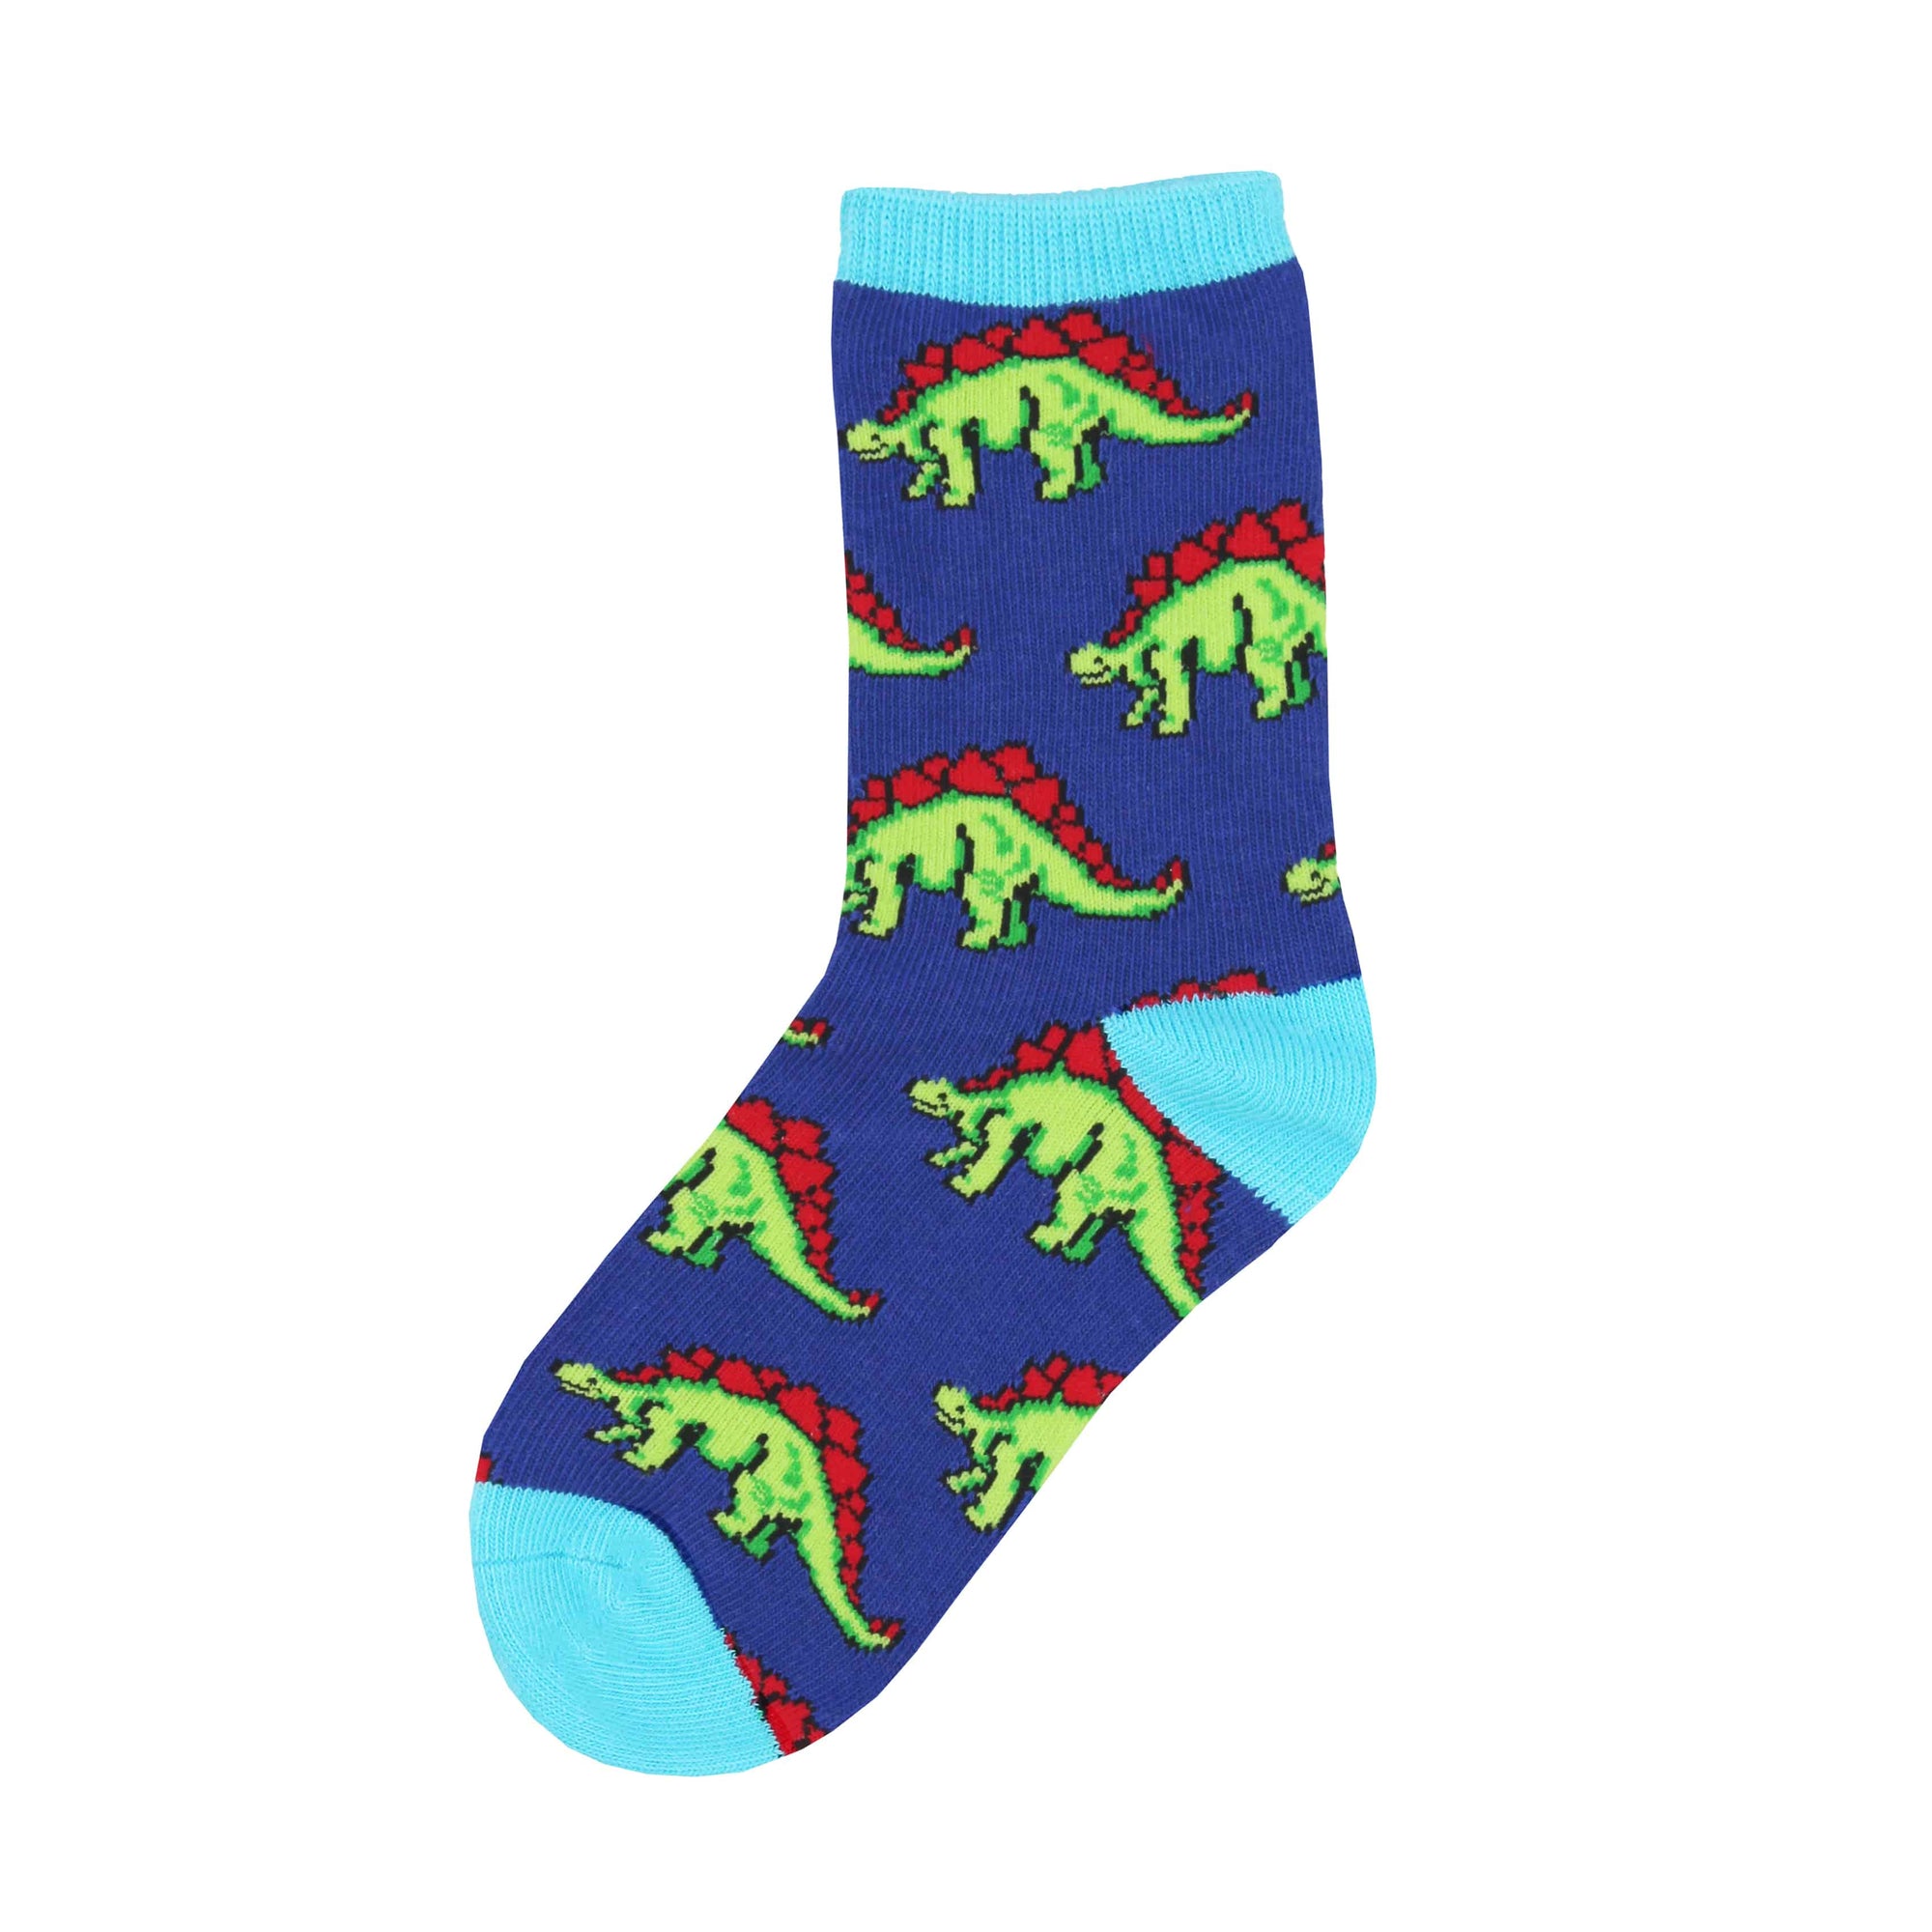 Green and red stegosaurus march across these blue kids' dinosaur socks.